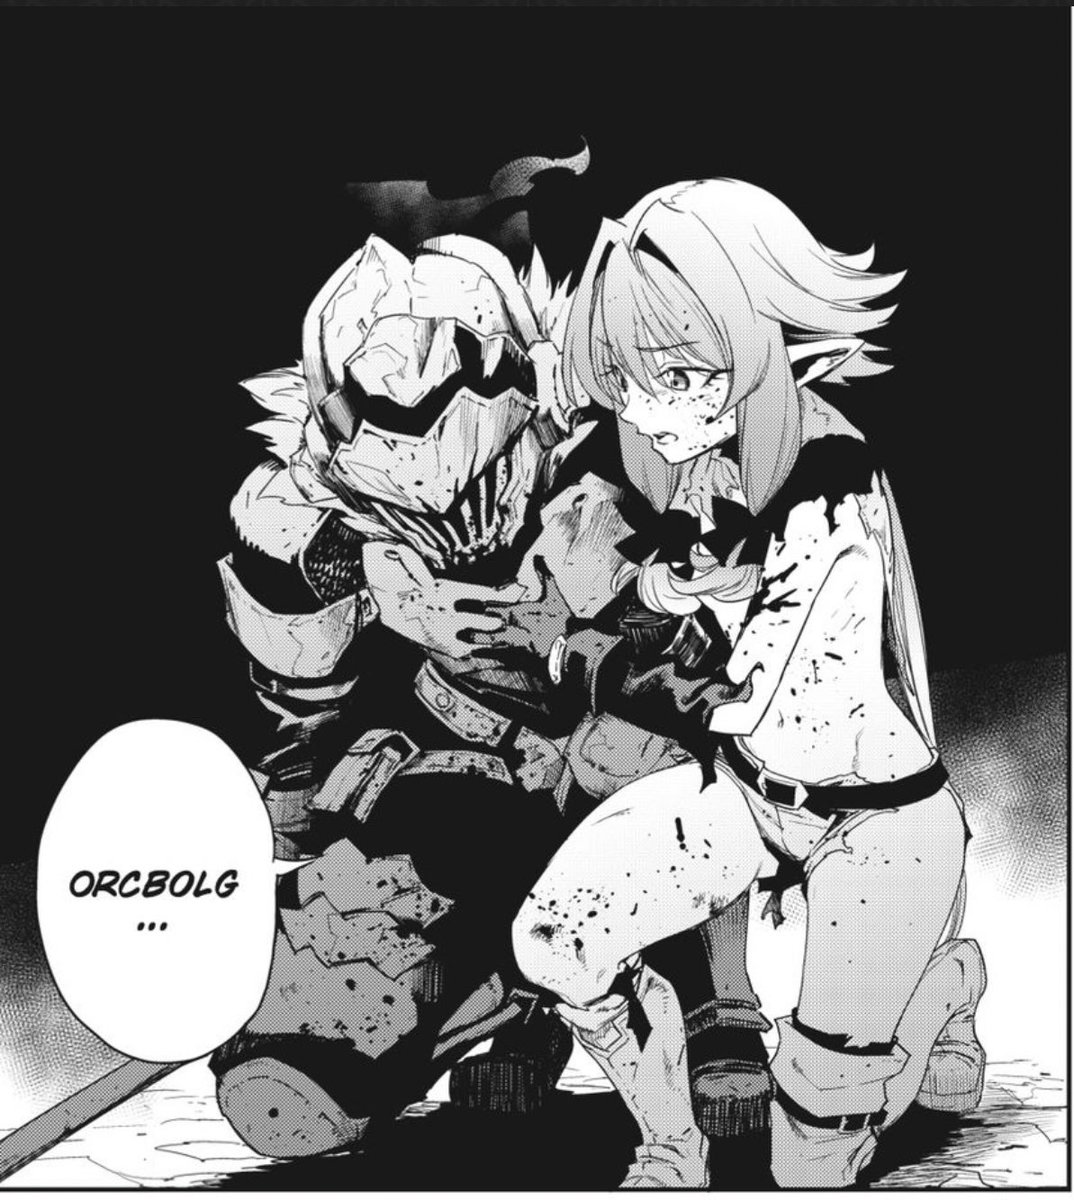 High elf archer is the biggest queen in this series

Out of all the chicks that want goblin slayer she's the best pick since she can actually keep up with him lmao 